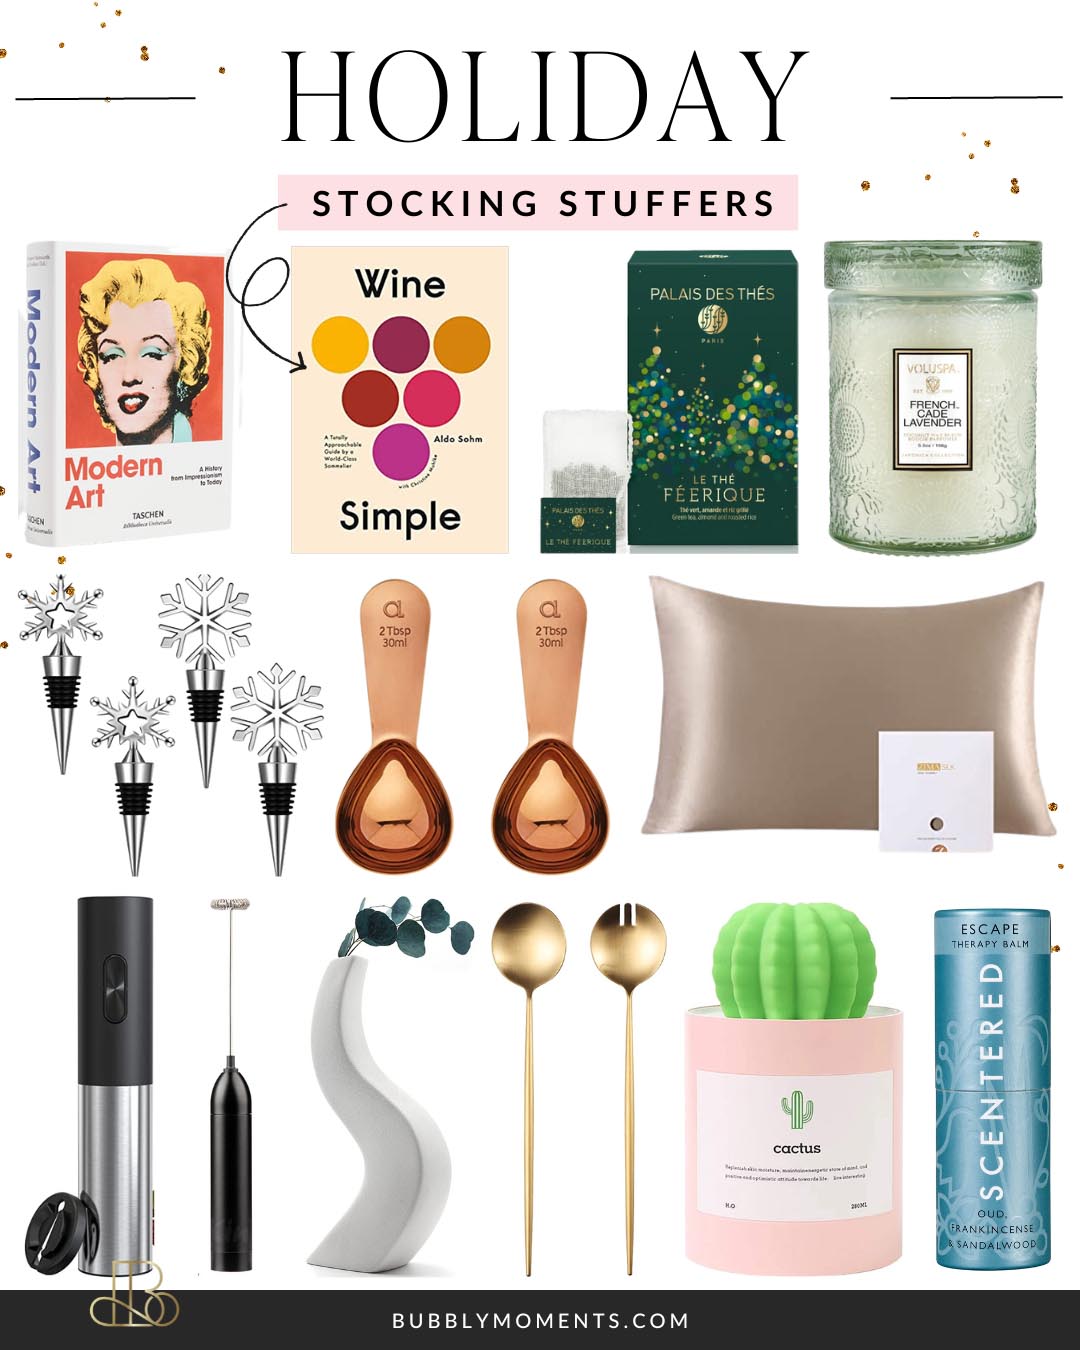 49 Best Stocking Stuffers for Christmas and the Holidays 2022